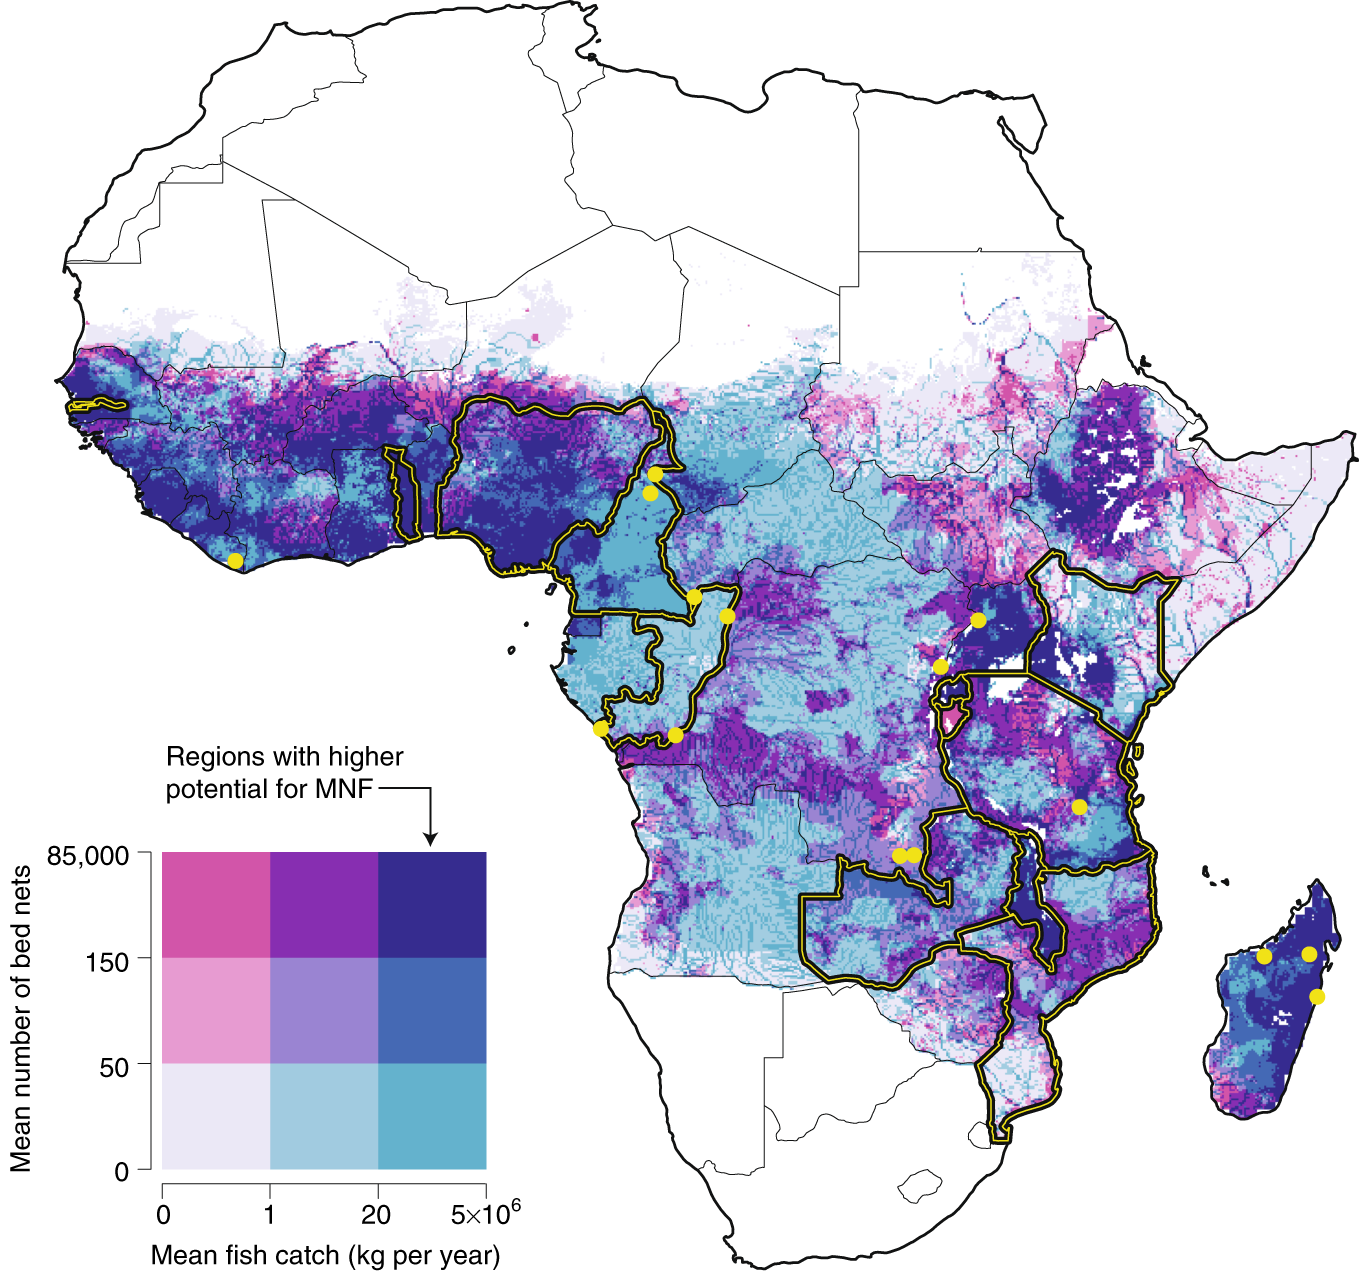 Maps and metrics of insecticide-treated net access, use, and nets